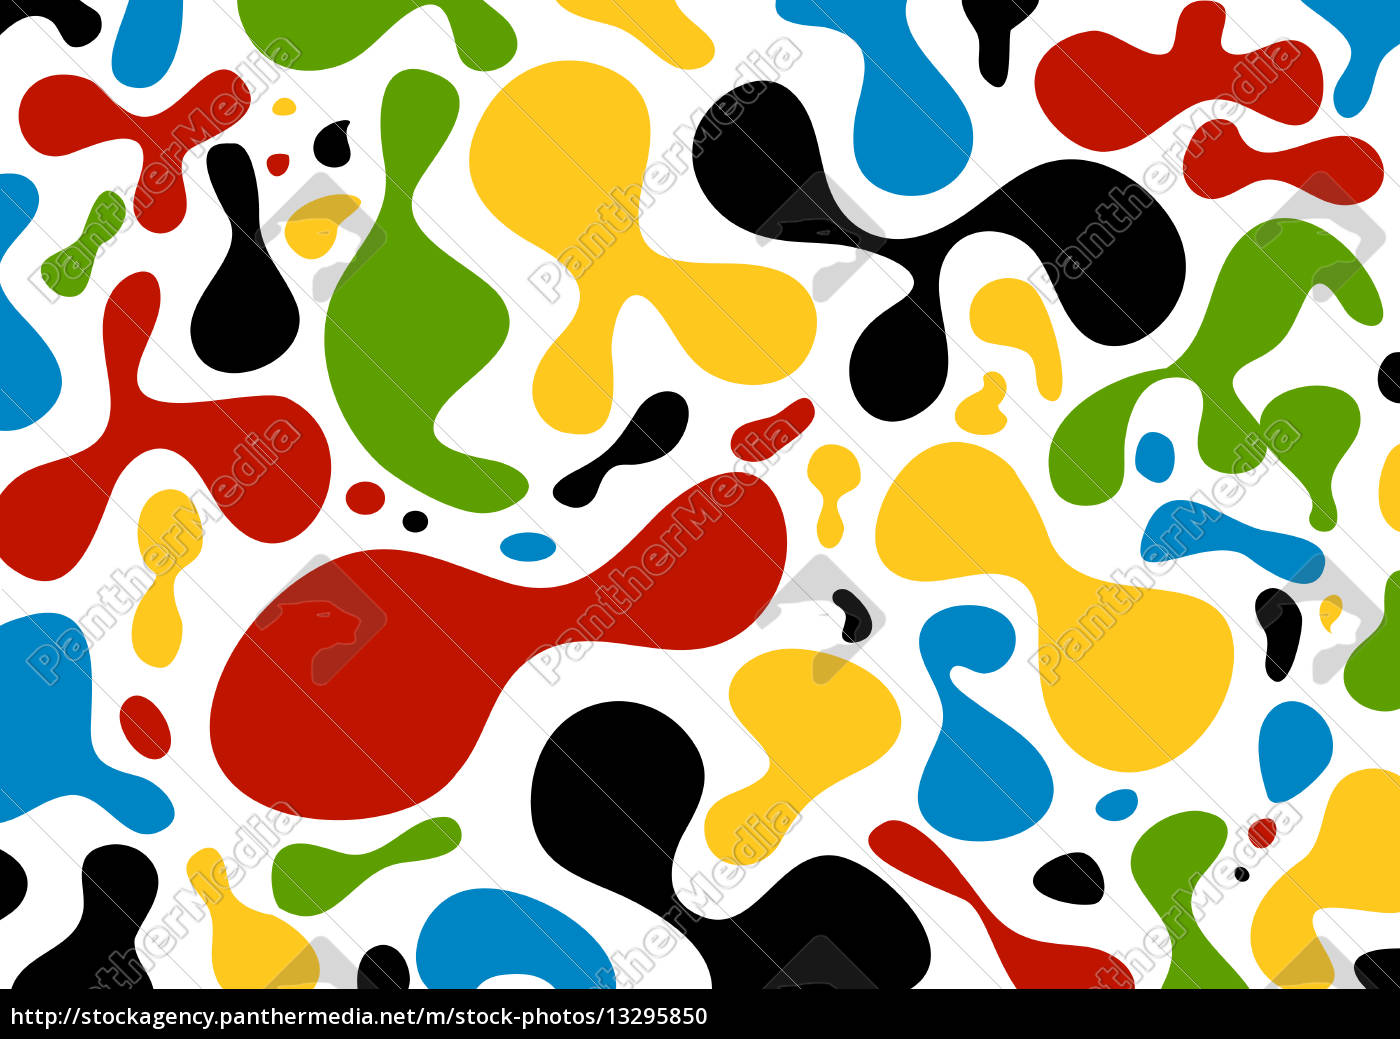 Download Cow Pattern Bunt2 Royalty Free Image 13295850 Panthermedia Stock Agency